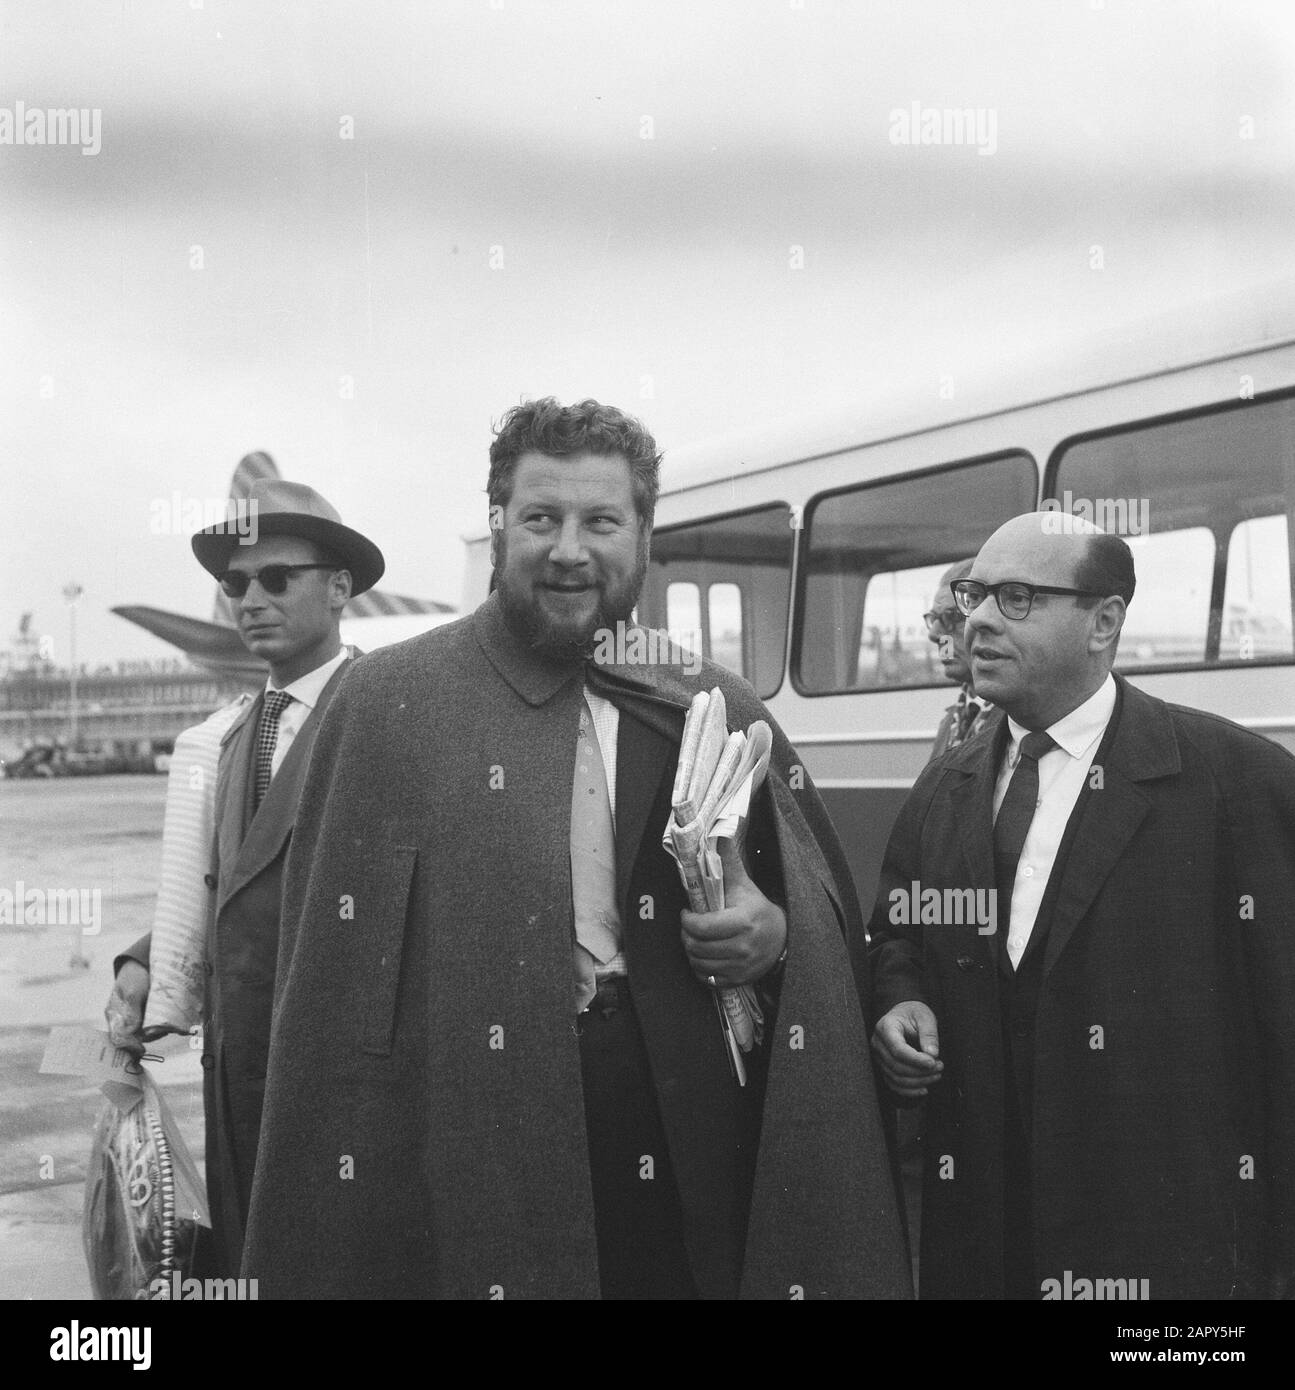 Peter Ustinov, English film director [next to him Simon van Collem] Annotation: Peter Ustinov was in our country for an interview with Simon van Collem for his television show 'Turnbox'.. This interview was only broadcast by the VPRO television on January 5, 1963 Date: September 24, 1962 Keywords: film directors Stock Photo